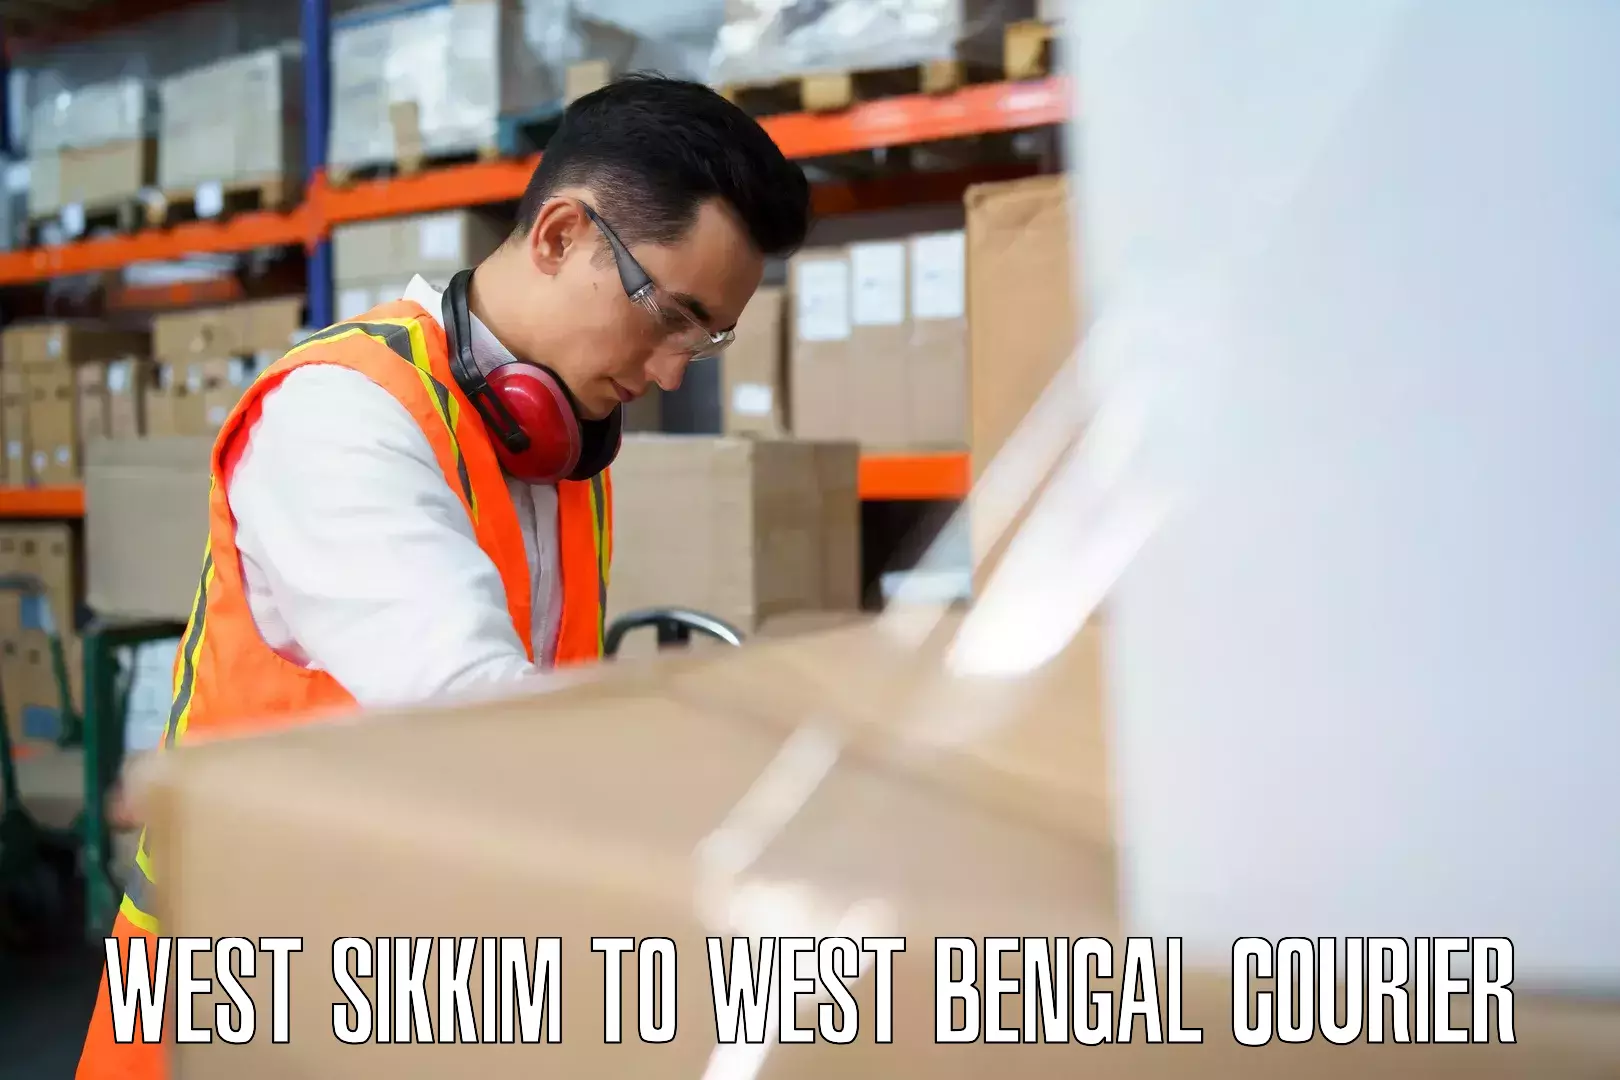 Baggage shipping advice West Sikkim to Bolpur